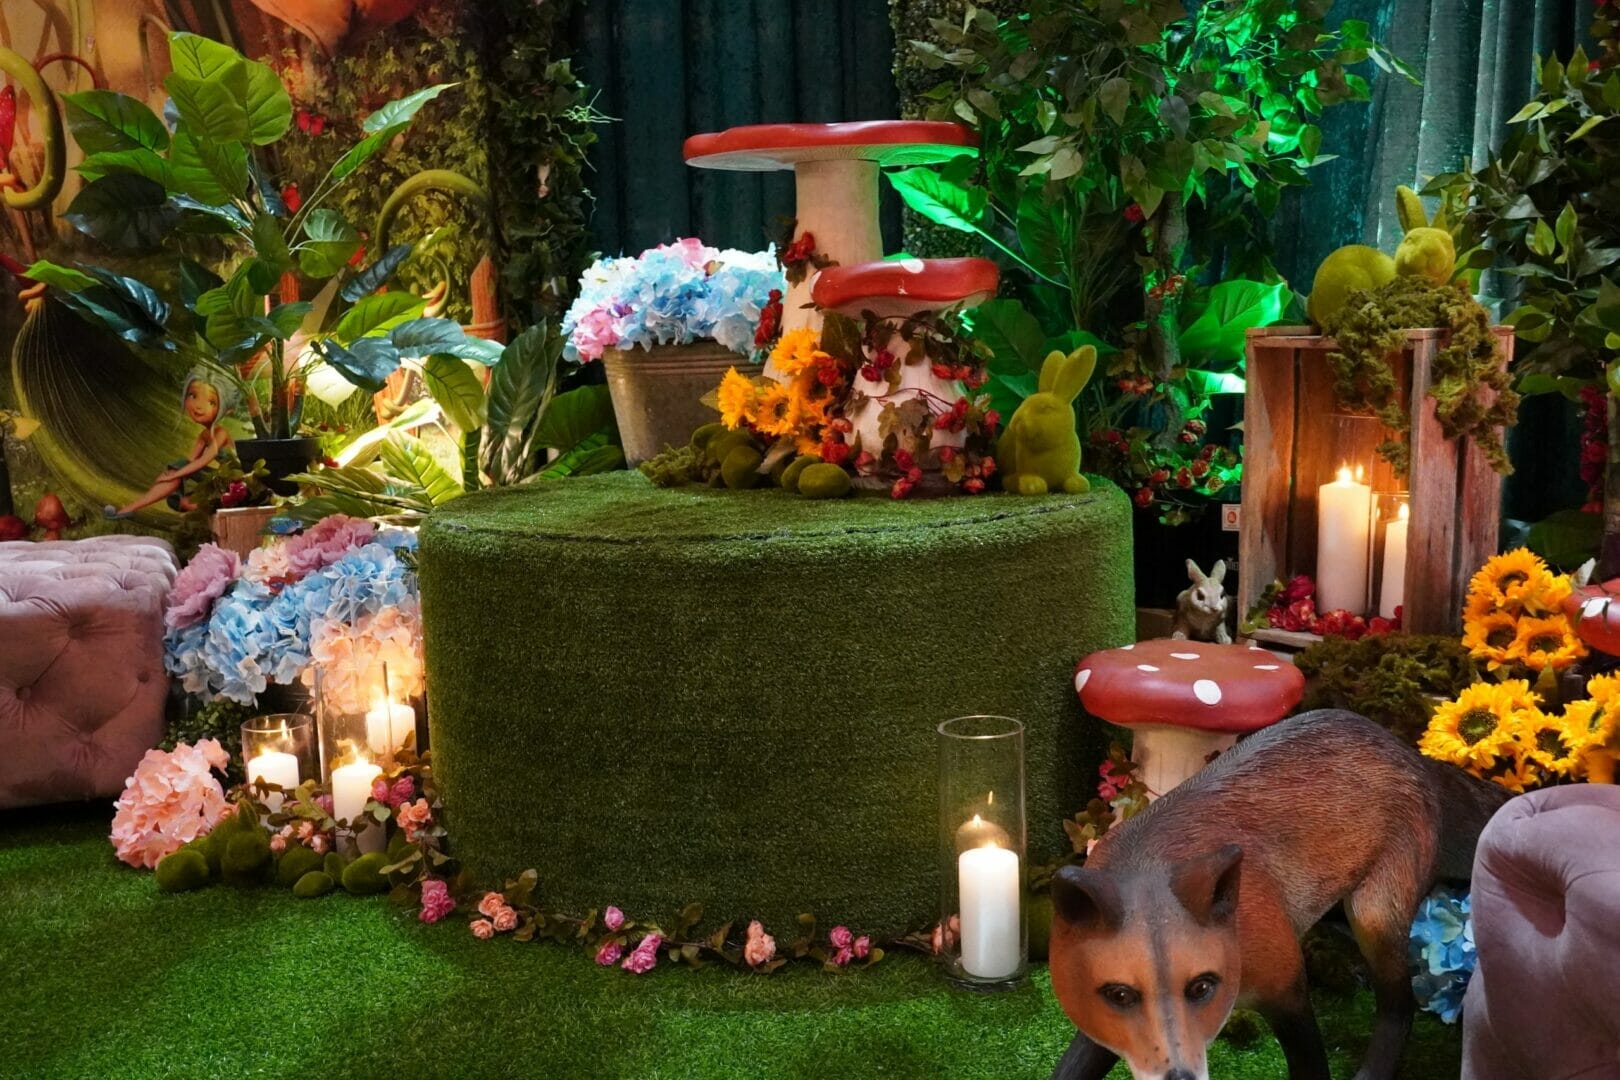 artificial flowers, grass ottoman, and themed props in enchanted garden themed setup